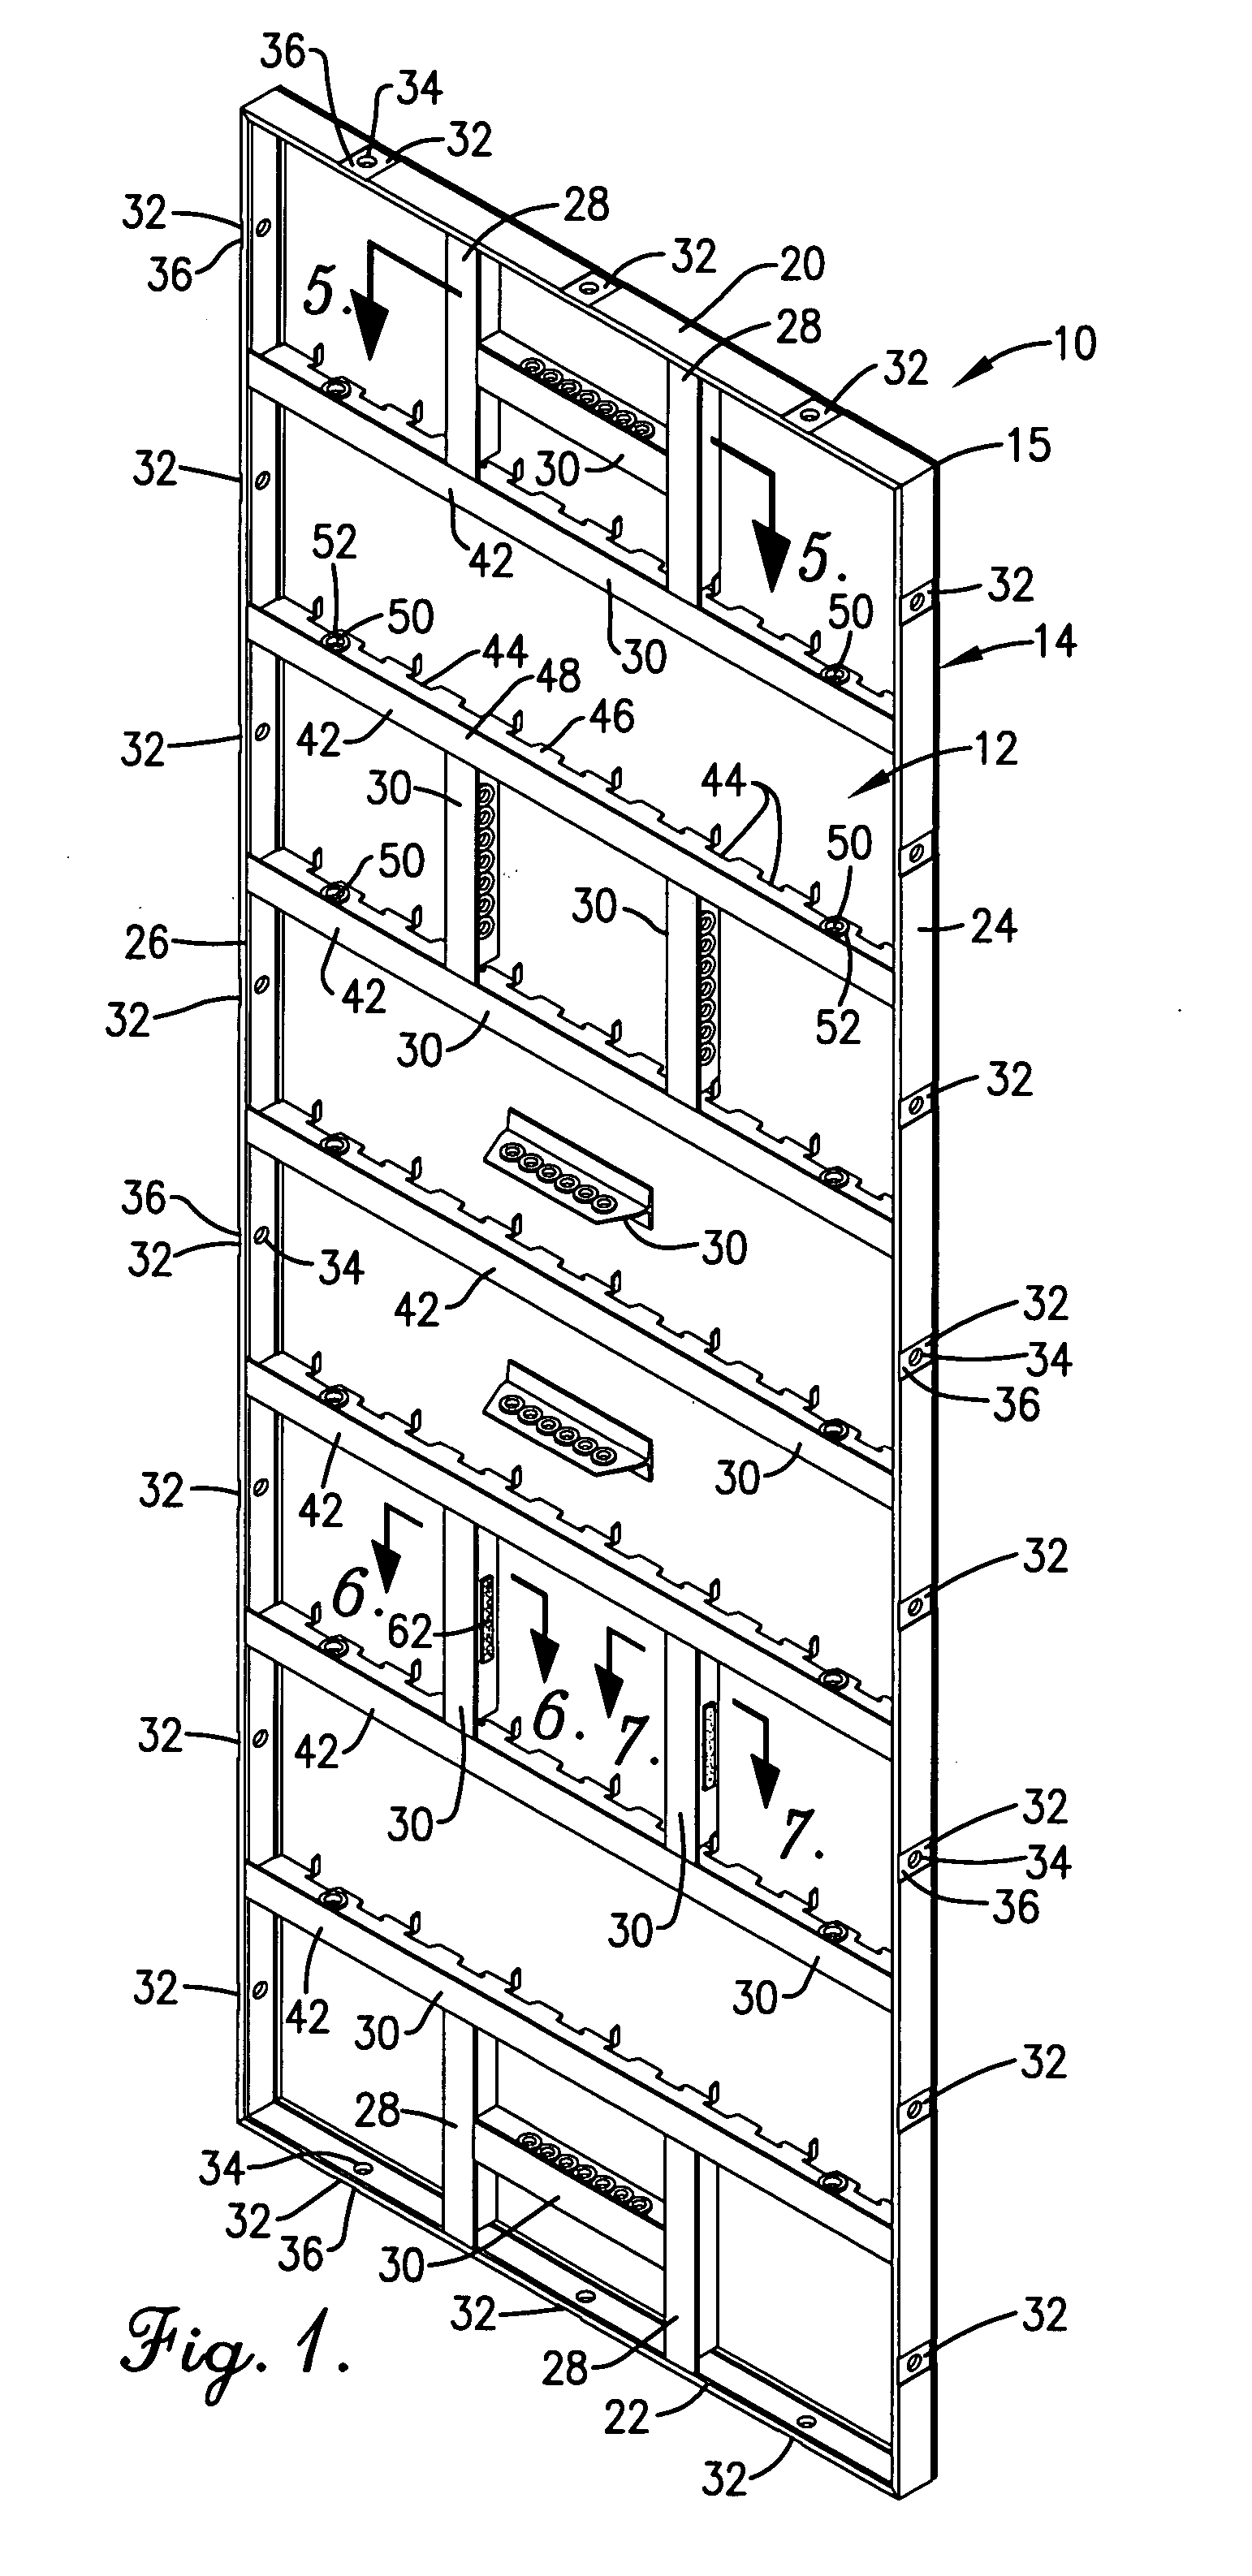 Concrete forming panel having built-in retaining structure for storing loose coupling parts